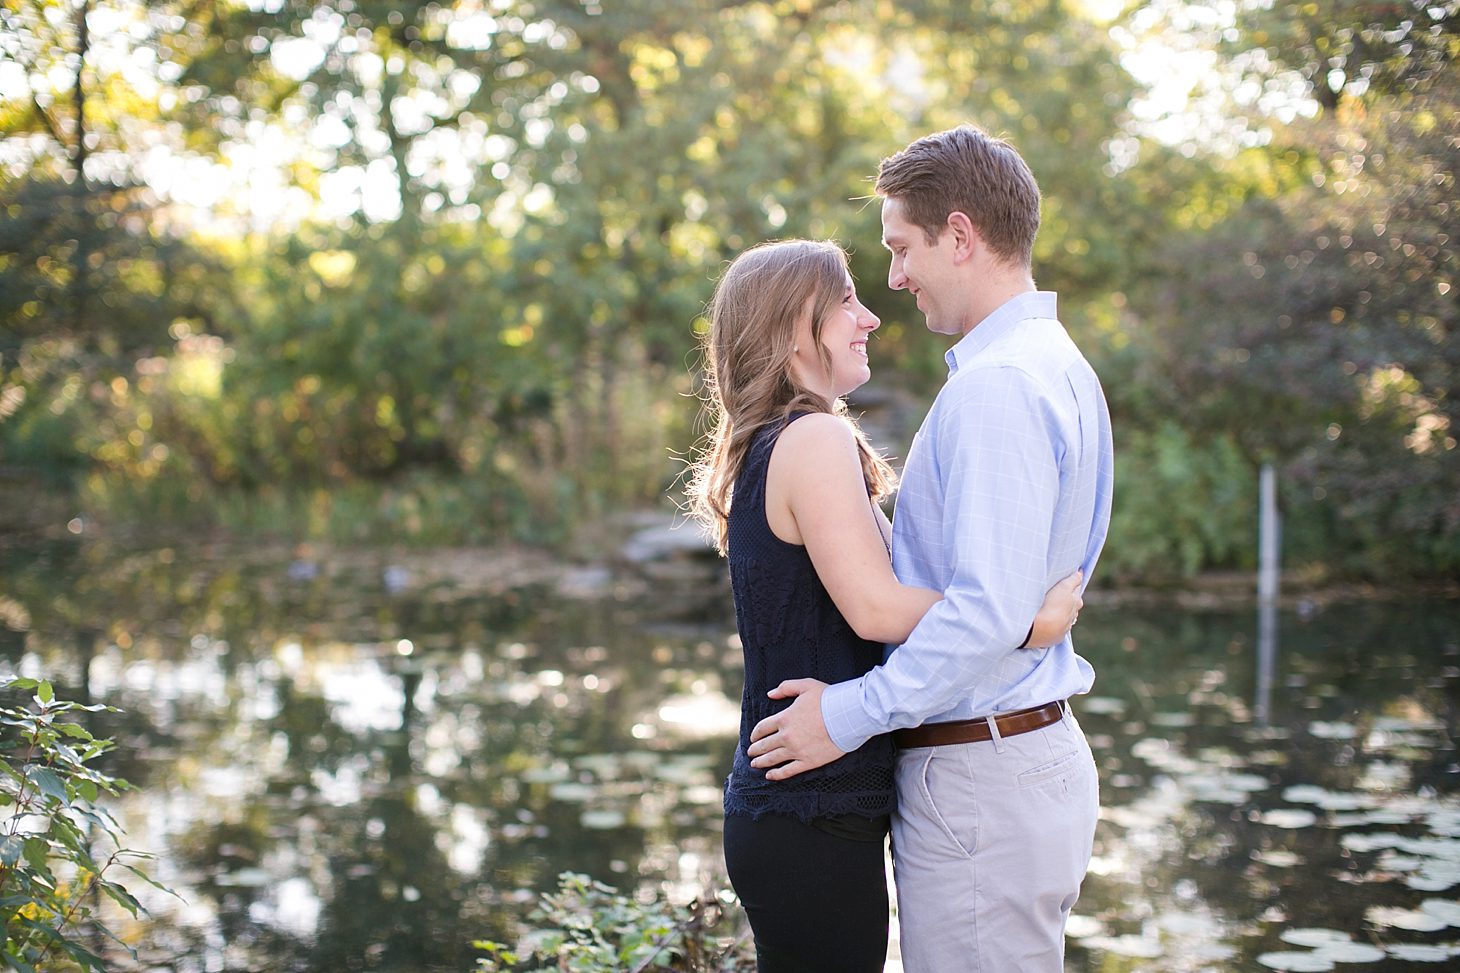 Lily pond & Chicago skyline engagement photos by Christy Tyler Photography_0001